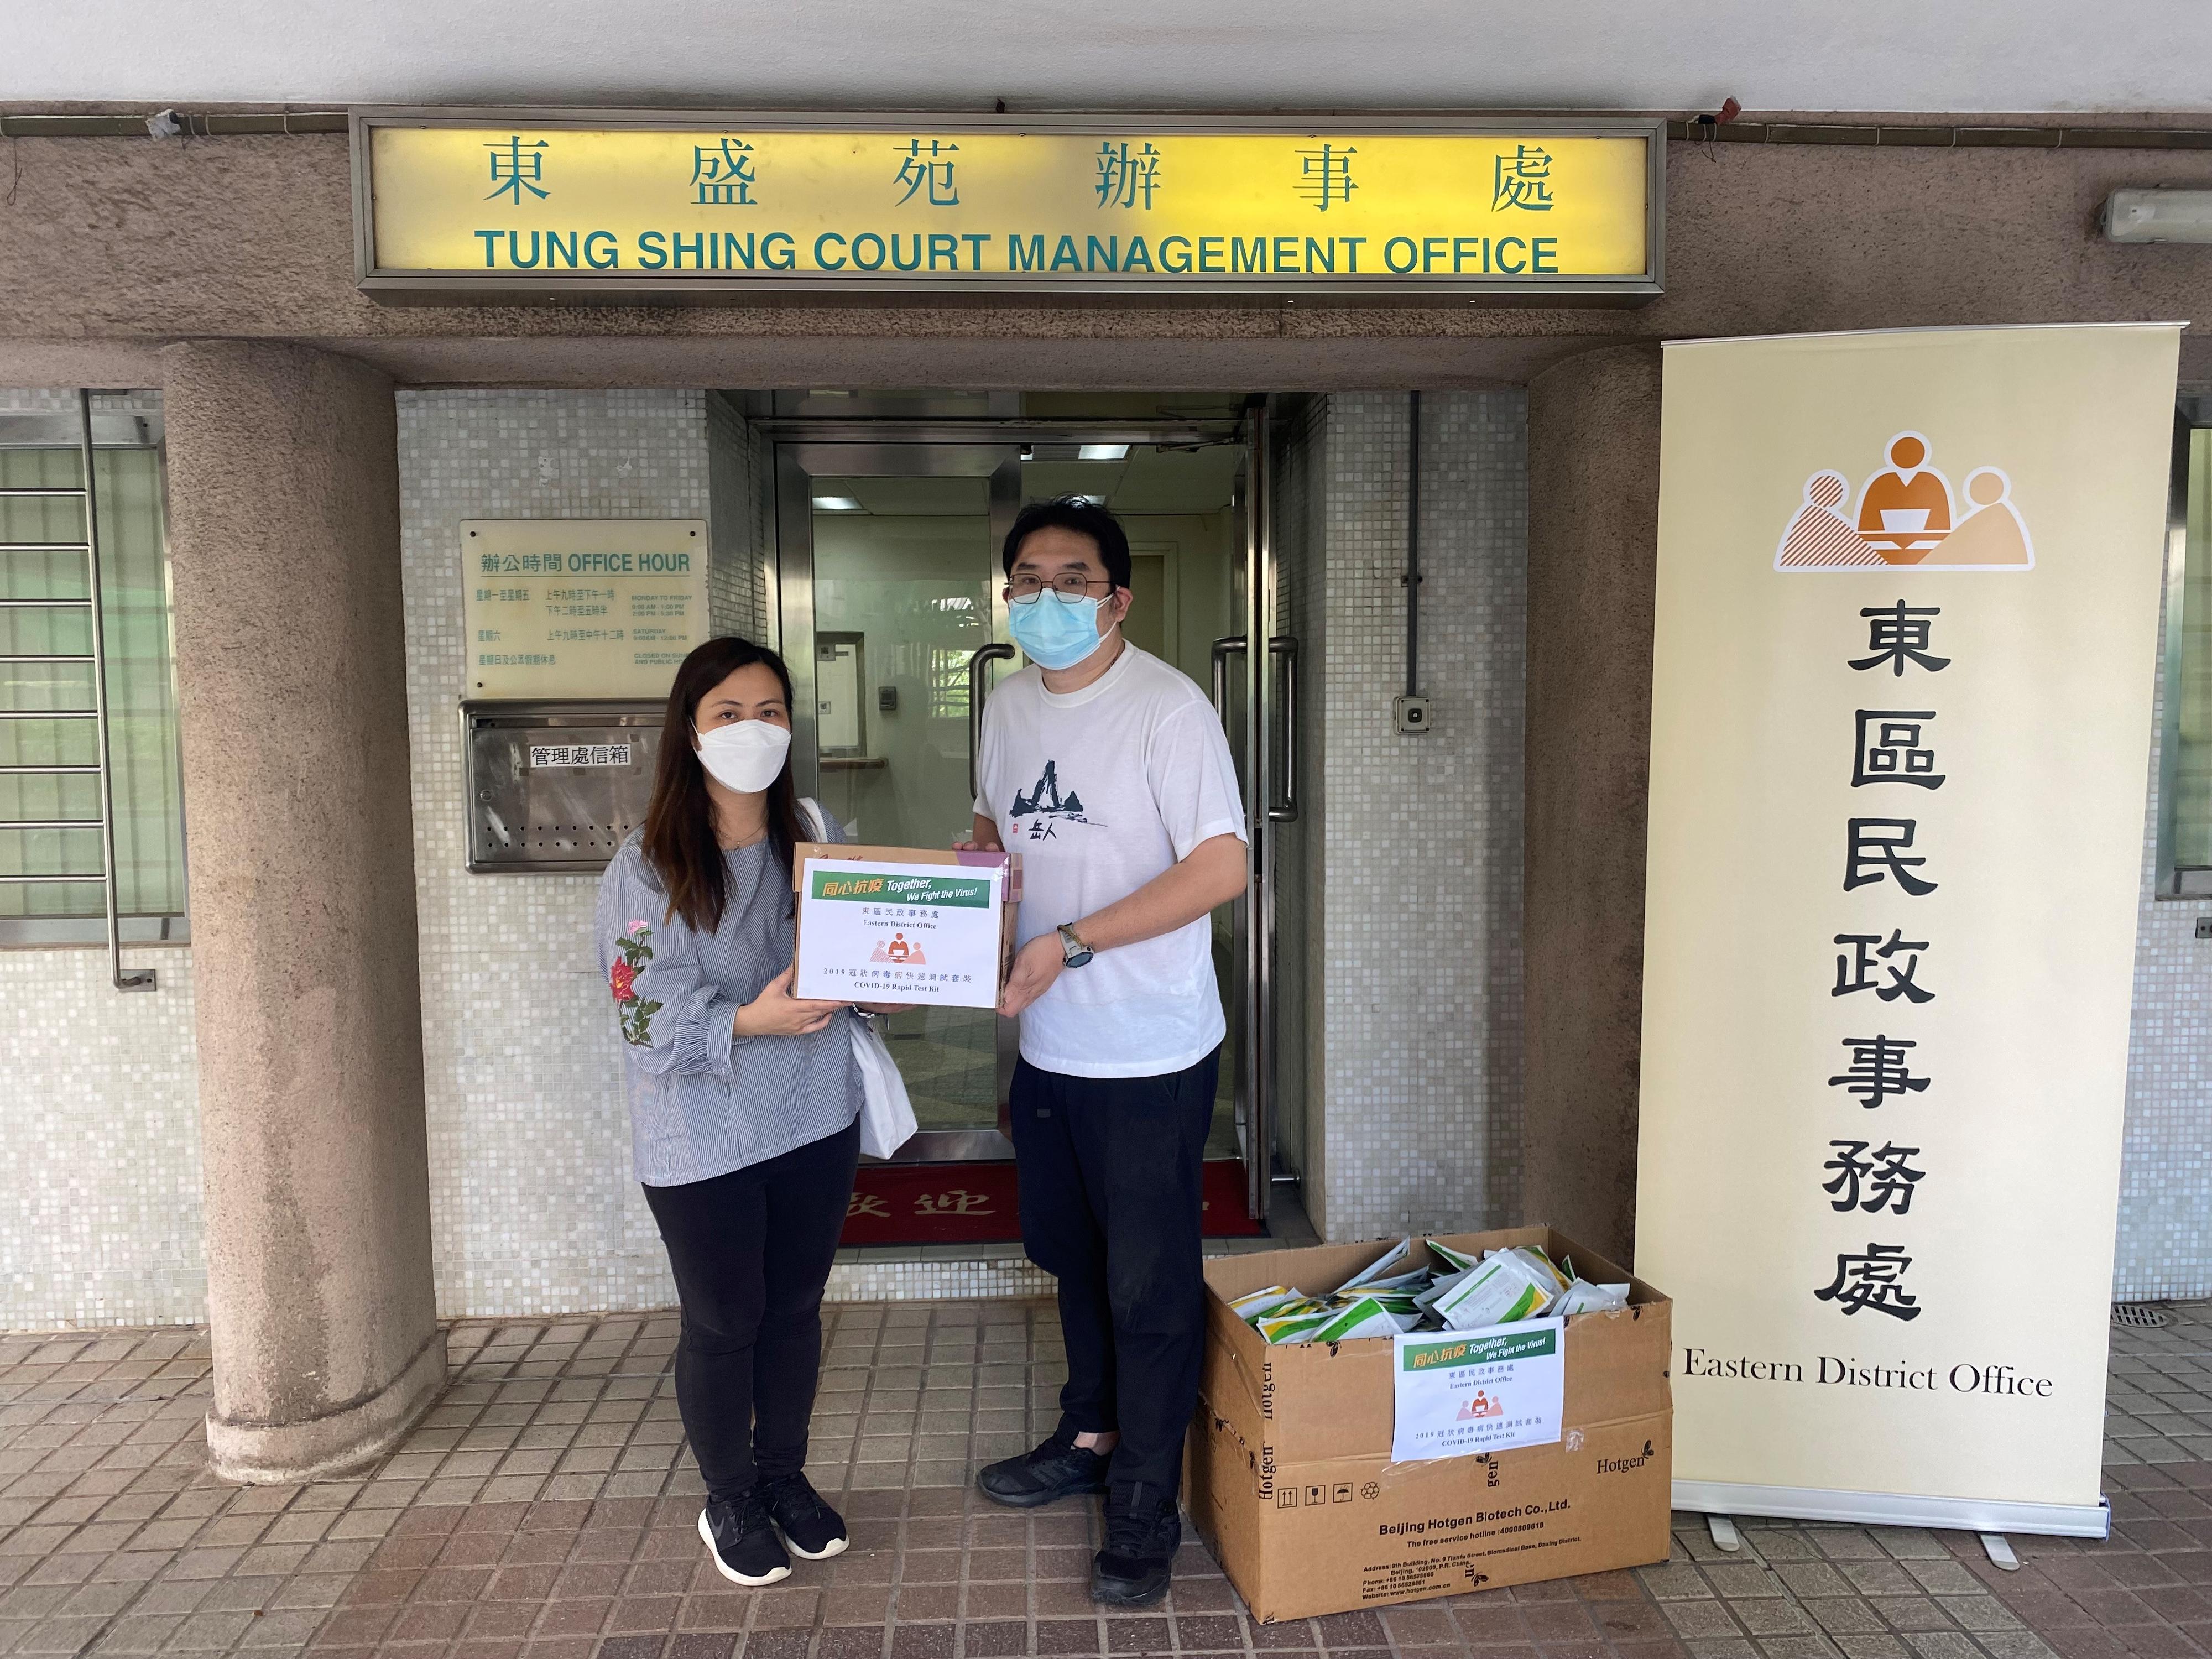 The Eastern District Office today (March 14) distributed COVID-19 rapid test kits to households, cleansing workers and property management staff living and working in Tung Shing Court for voluntary testing through the property management company.